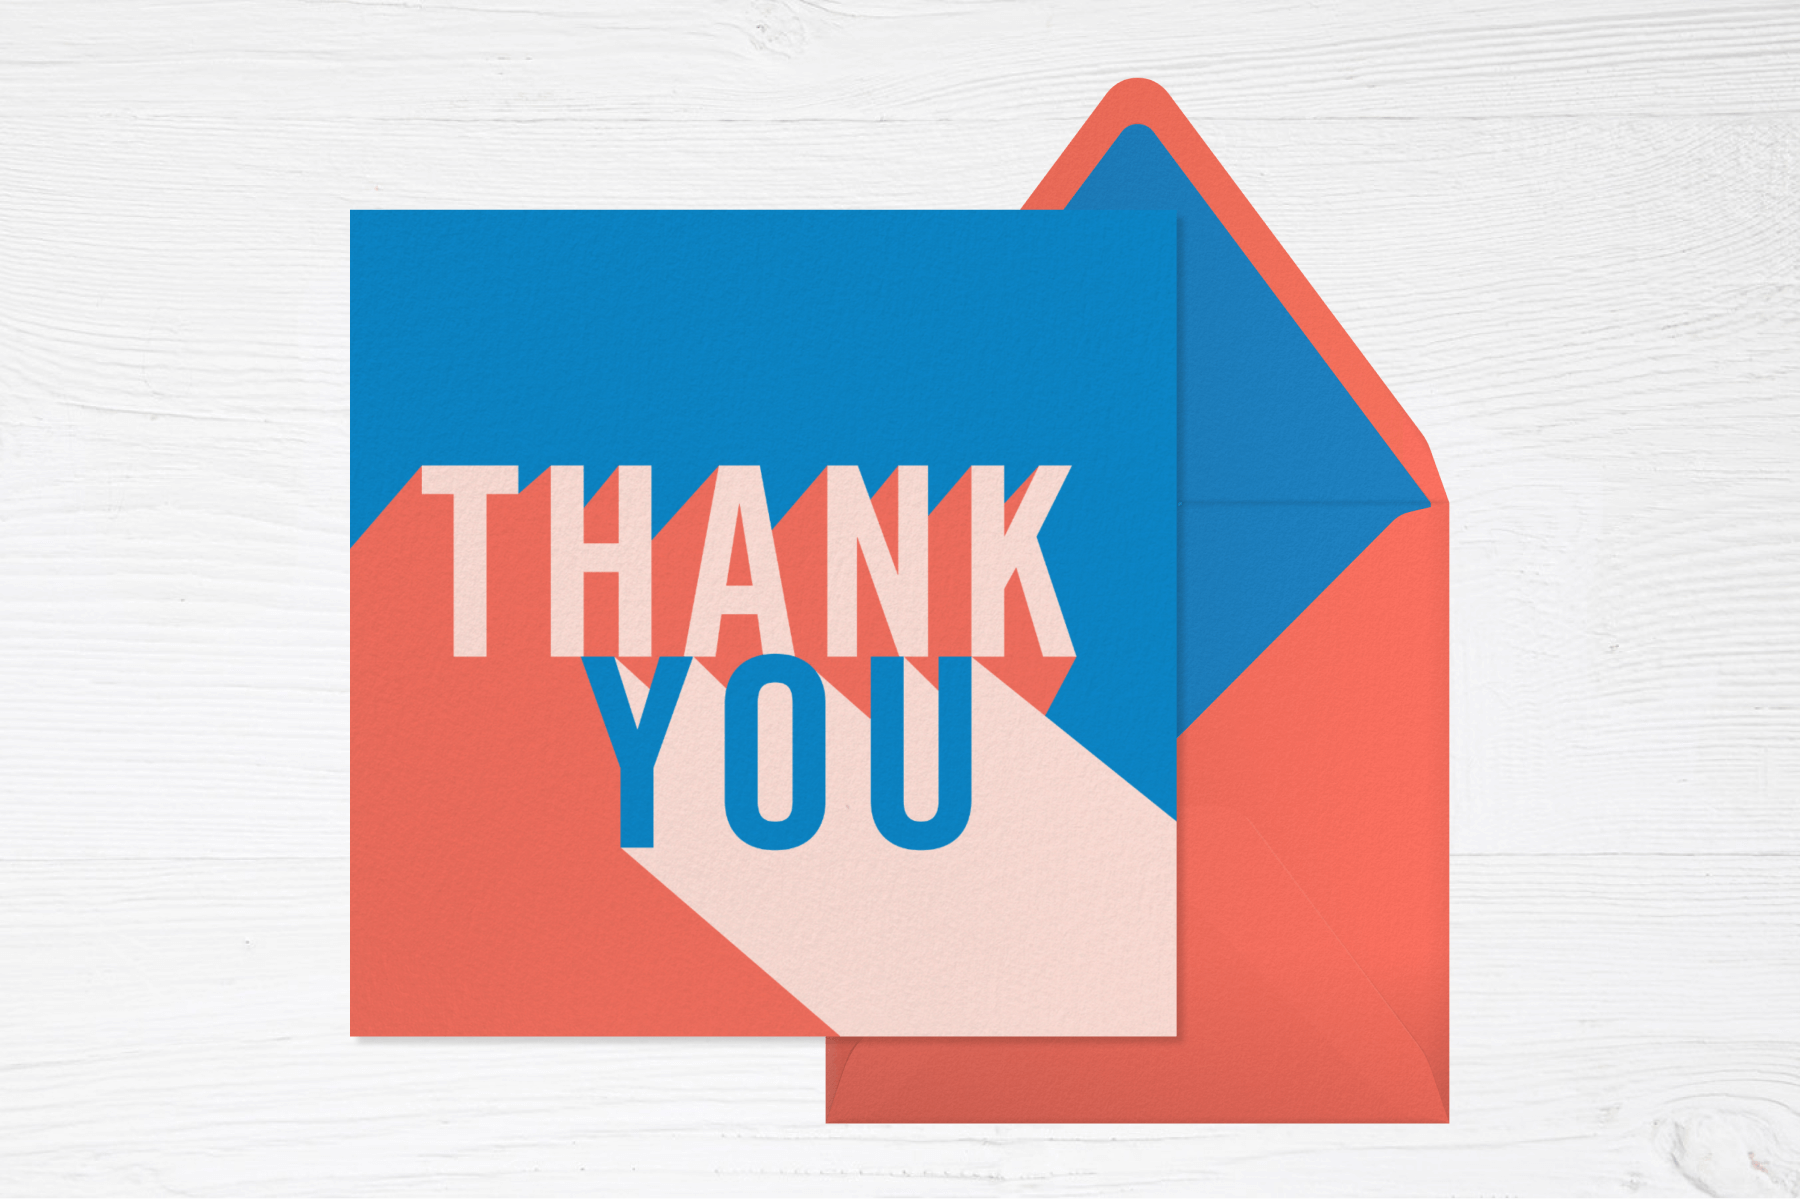 A thank you card in blue, peach, and dark orange with the words “thank you” typed in block letters with two-point perspective.